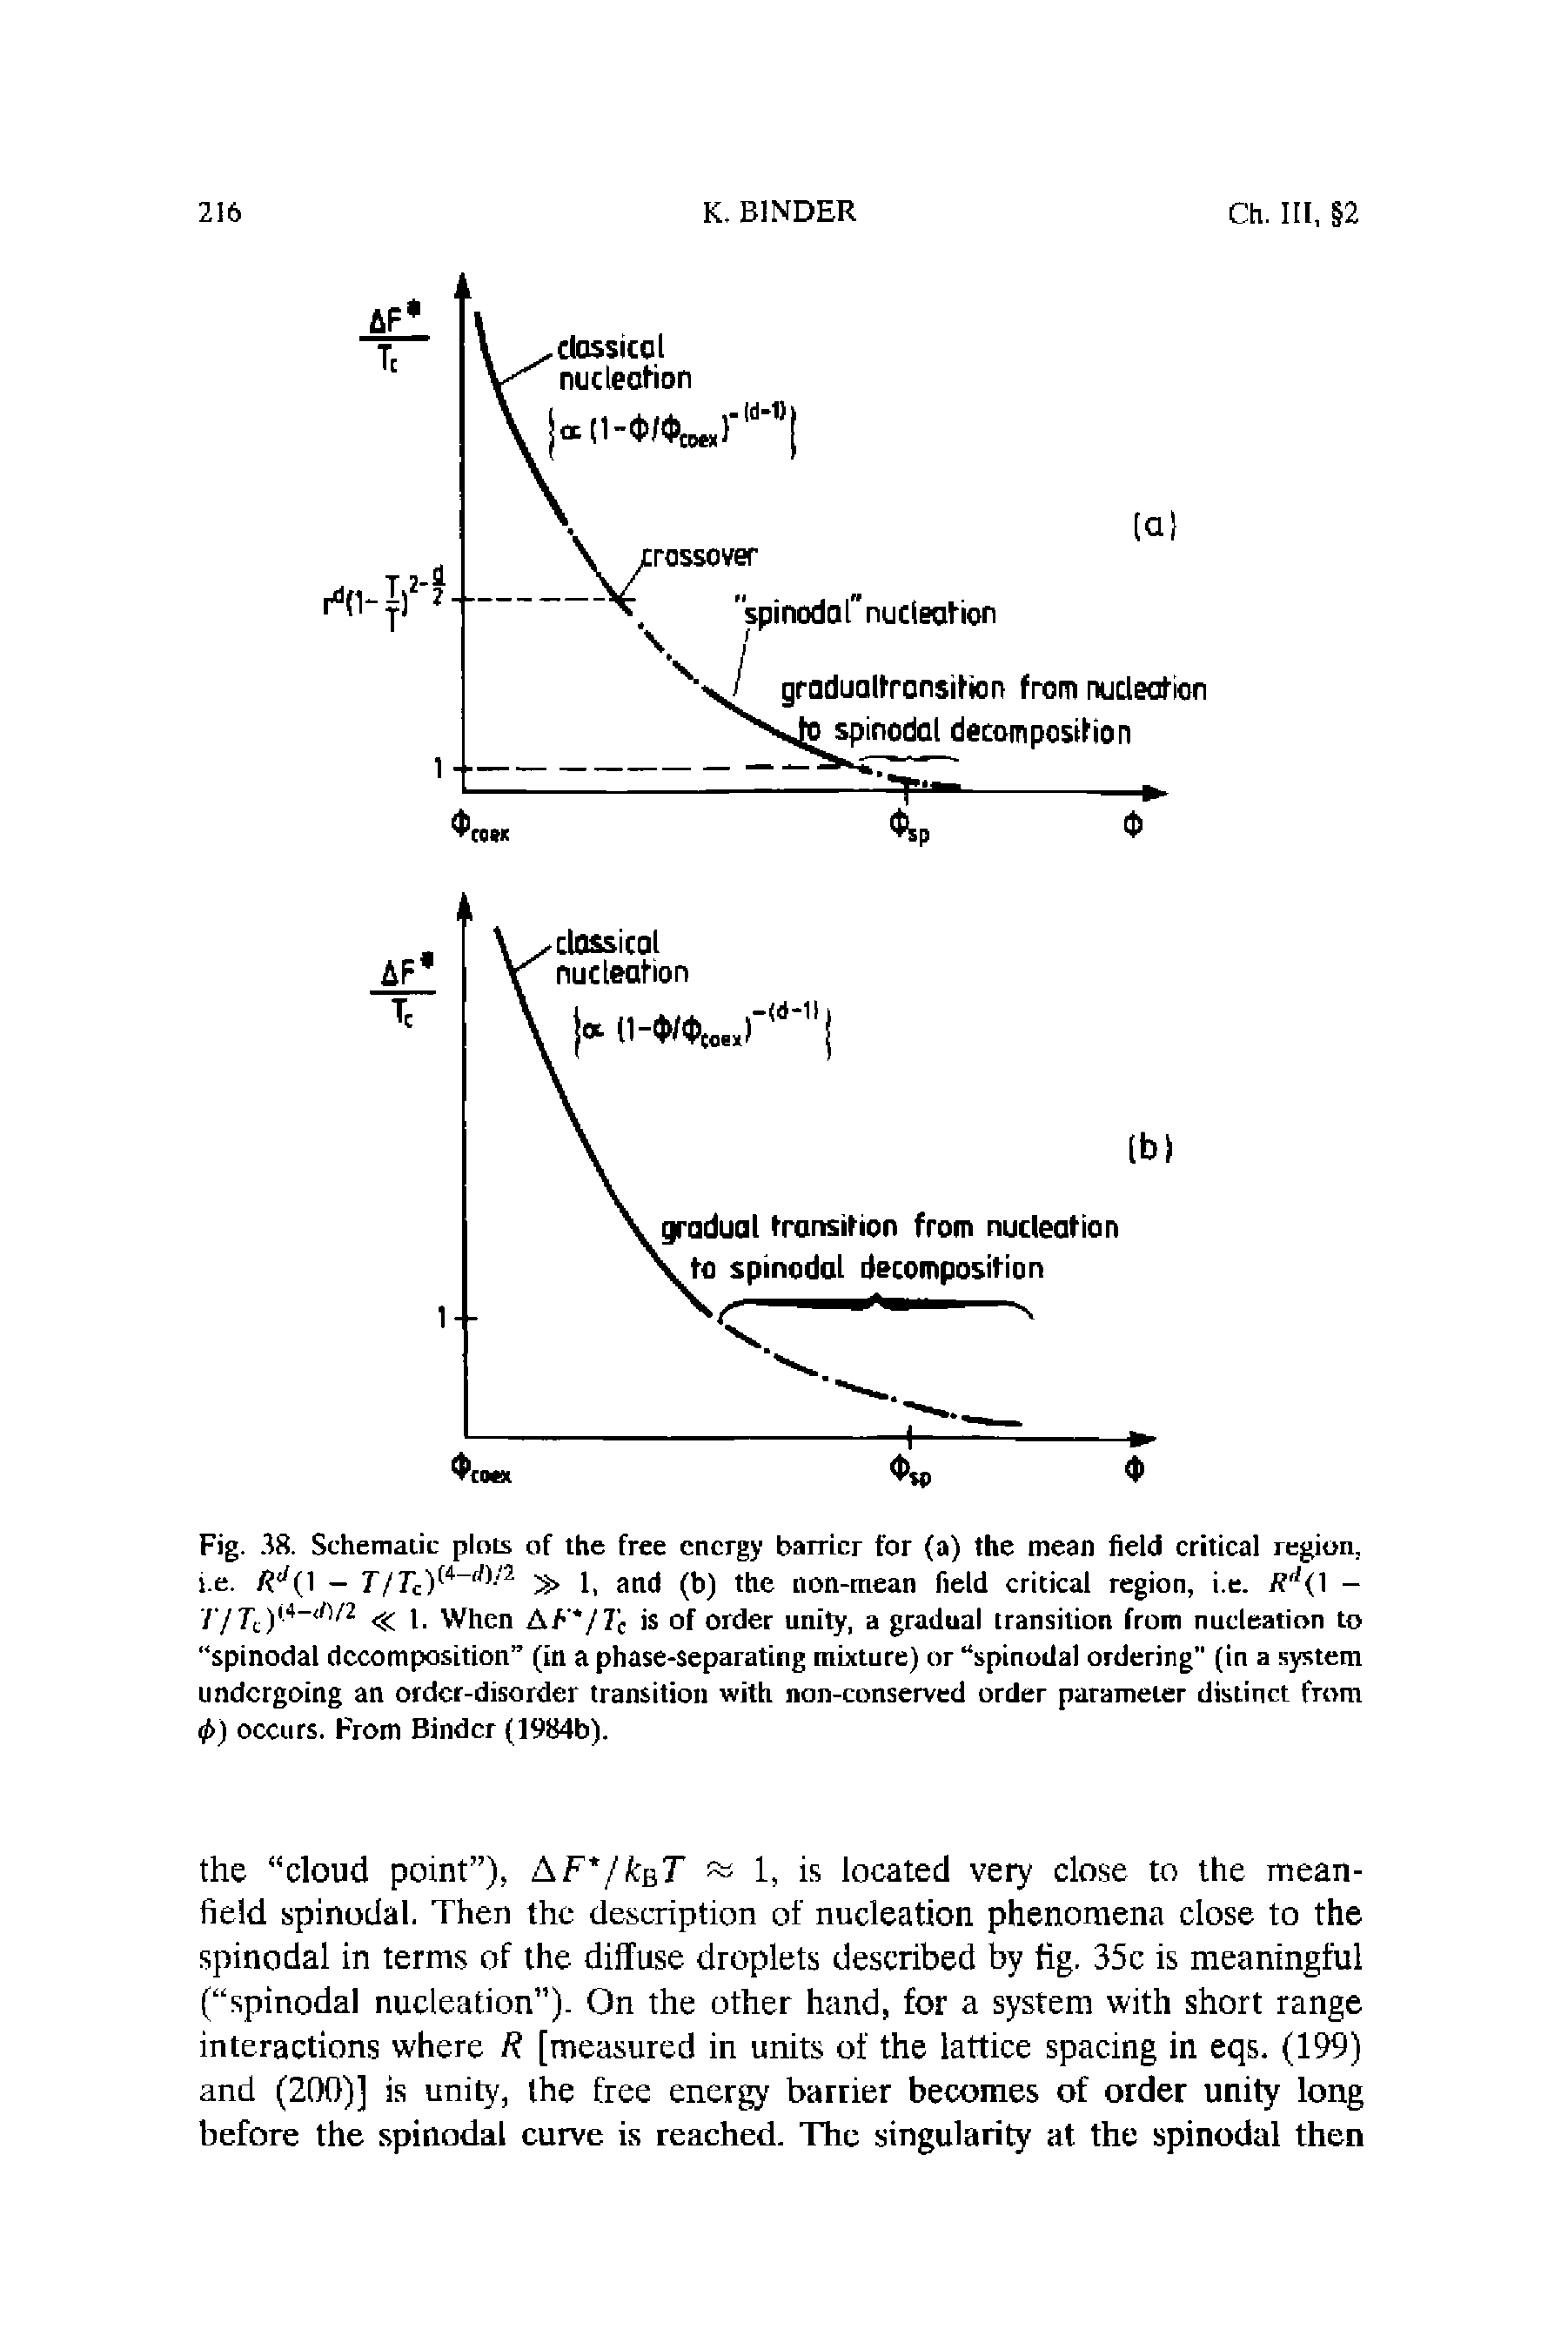 Fig. 38. Schematic plots of the free energy barrier for (a) the mean field critical region, i.e. / </( 1 — 7/7 c)(4-f,V2 3> 1, and (b) the non-mean field critical region, i.e. R,l( 1 -/ /7 ) 4— V2 i. When AF /Tc is of order unity, a gradual transition from nucleation to spinodal decomposition (in a phase-separating mixture) or spinodal ordering" (in a system undergoing an order-disorder transition with non-conserved order parameter distinct from tj>) occurs. From Binder (1984b).